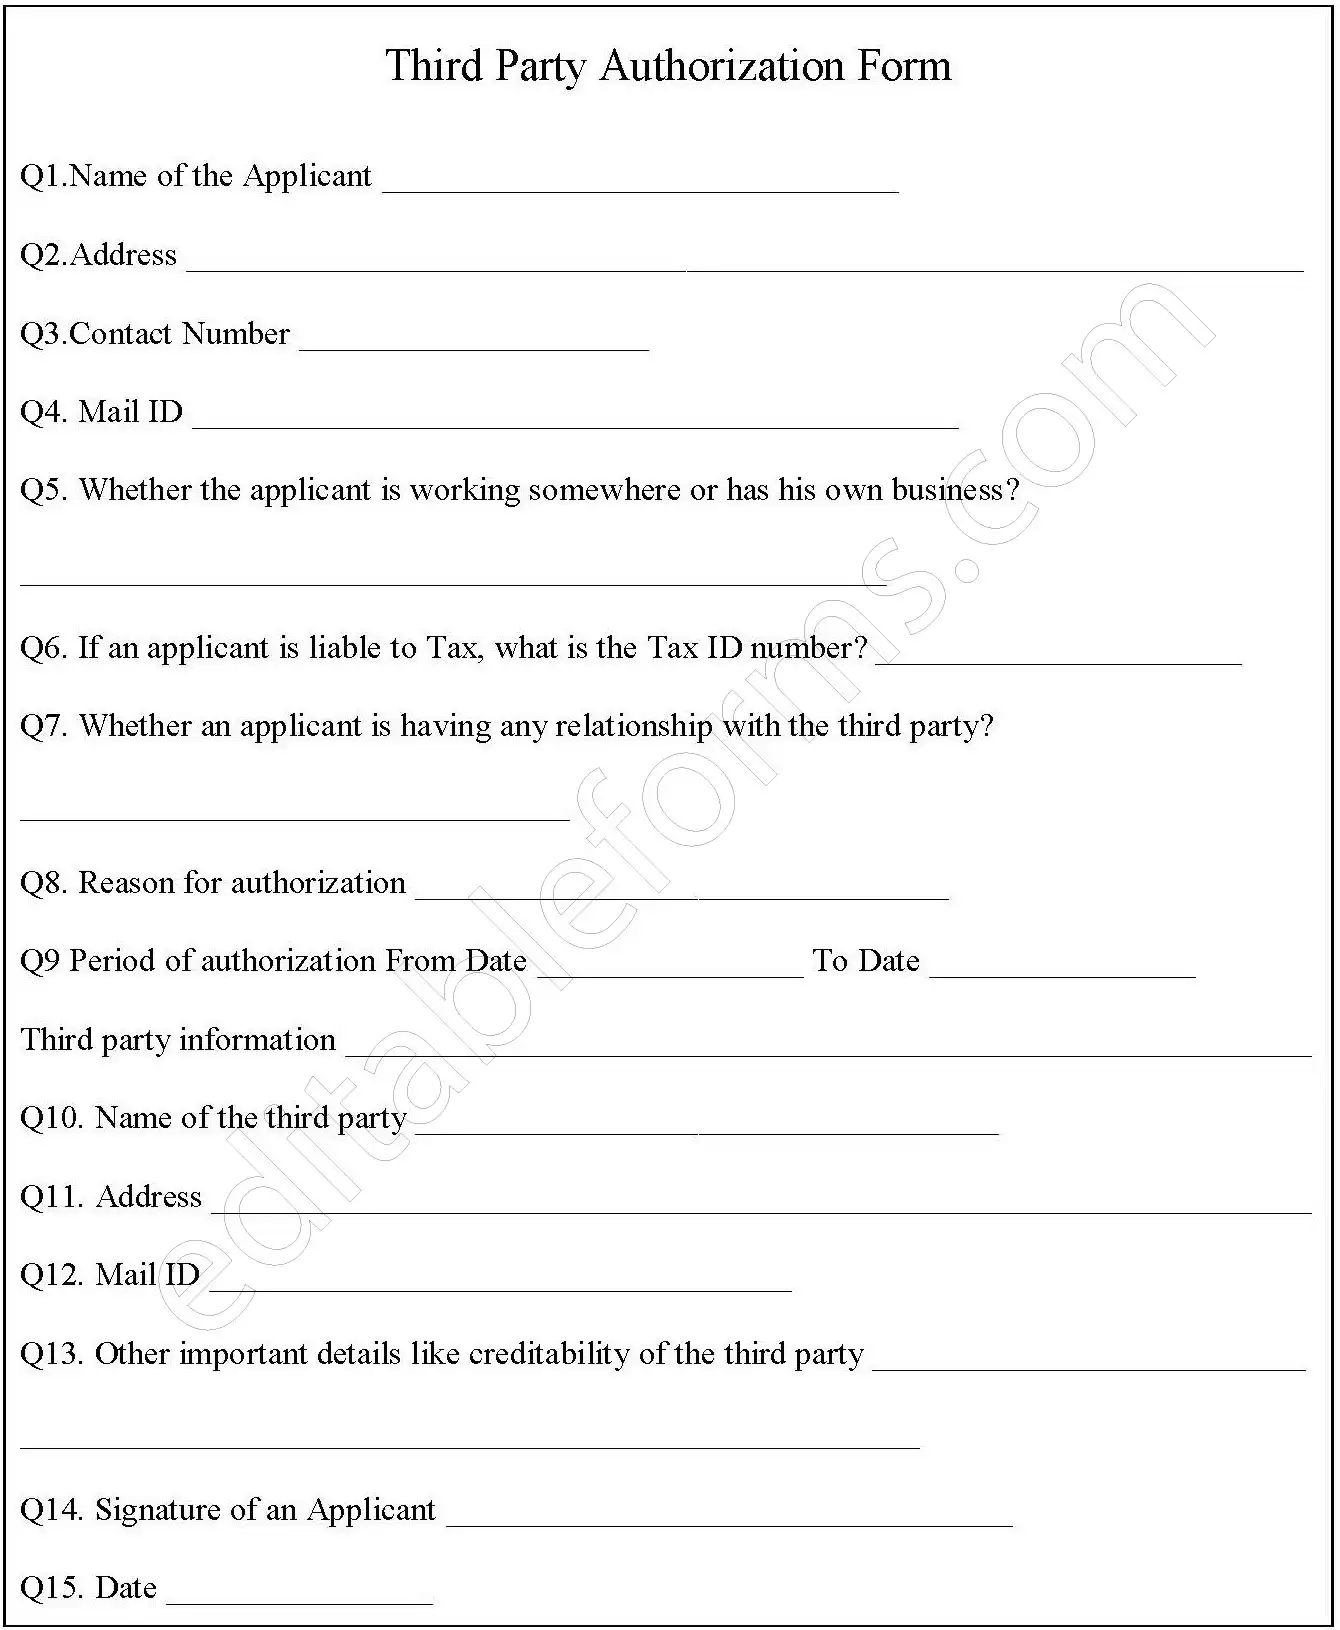 Third Party Authorization Form 4793